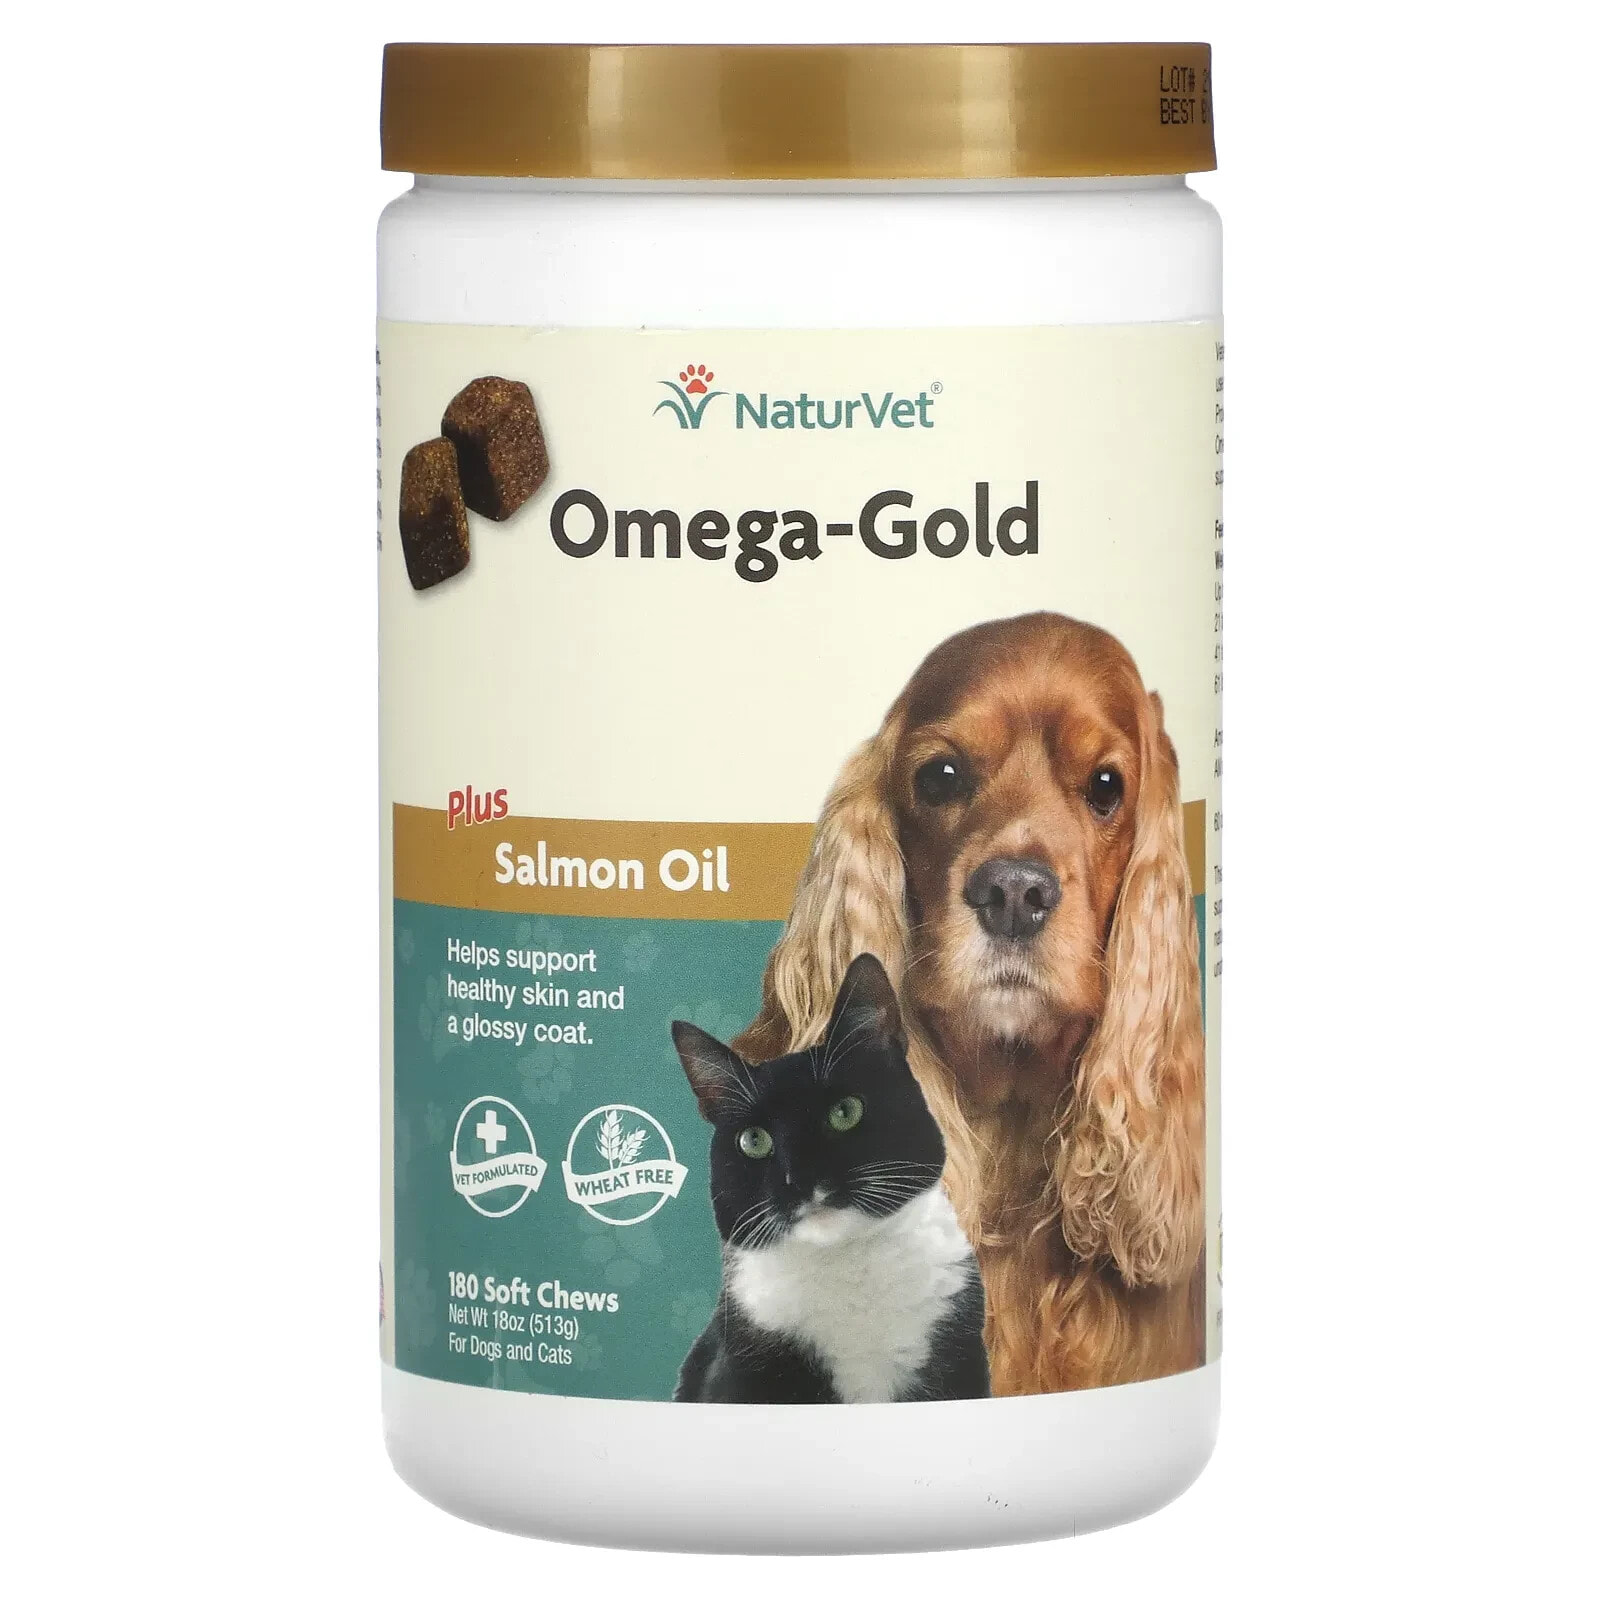 Omega-Gold Essential Fatty Acids +Salmon Oil, For Dogs and Cats, 180 Soft Chews, 18 oz (513 g)